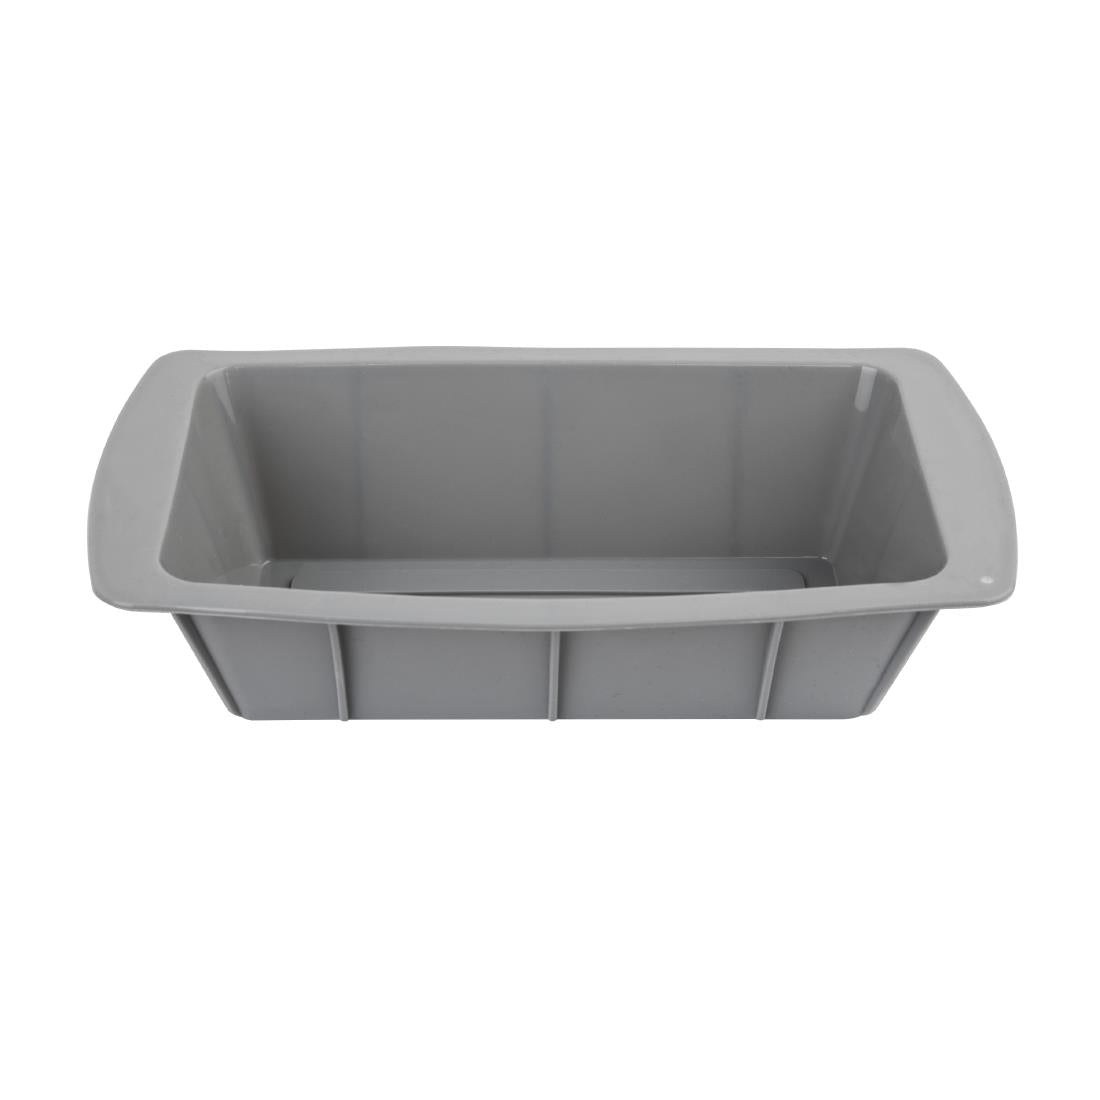 DA525 Vogue 1.5lb Flexible Silicone Loaf Pan JD Catering Equipment Solutions Ltd